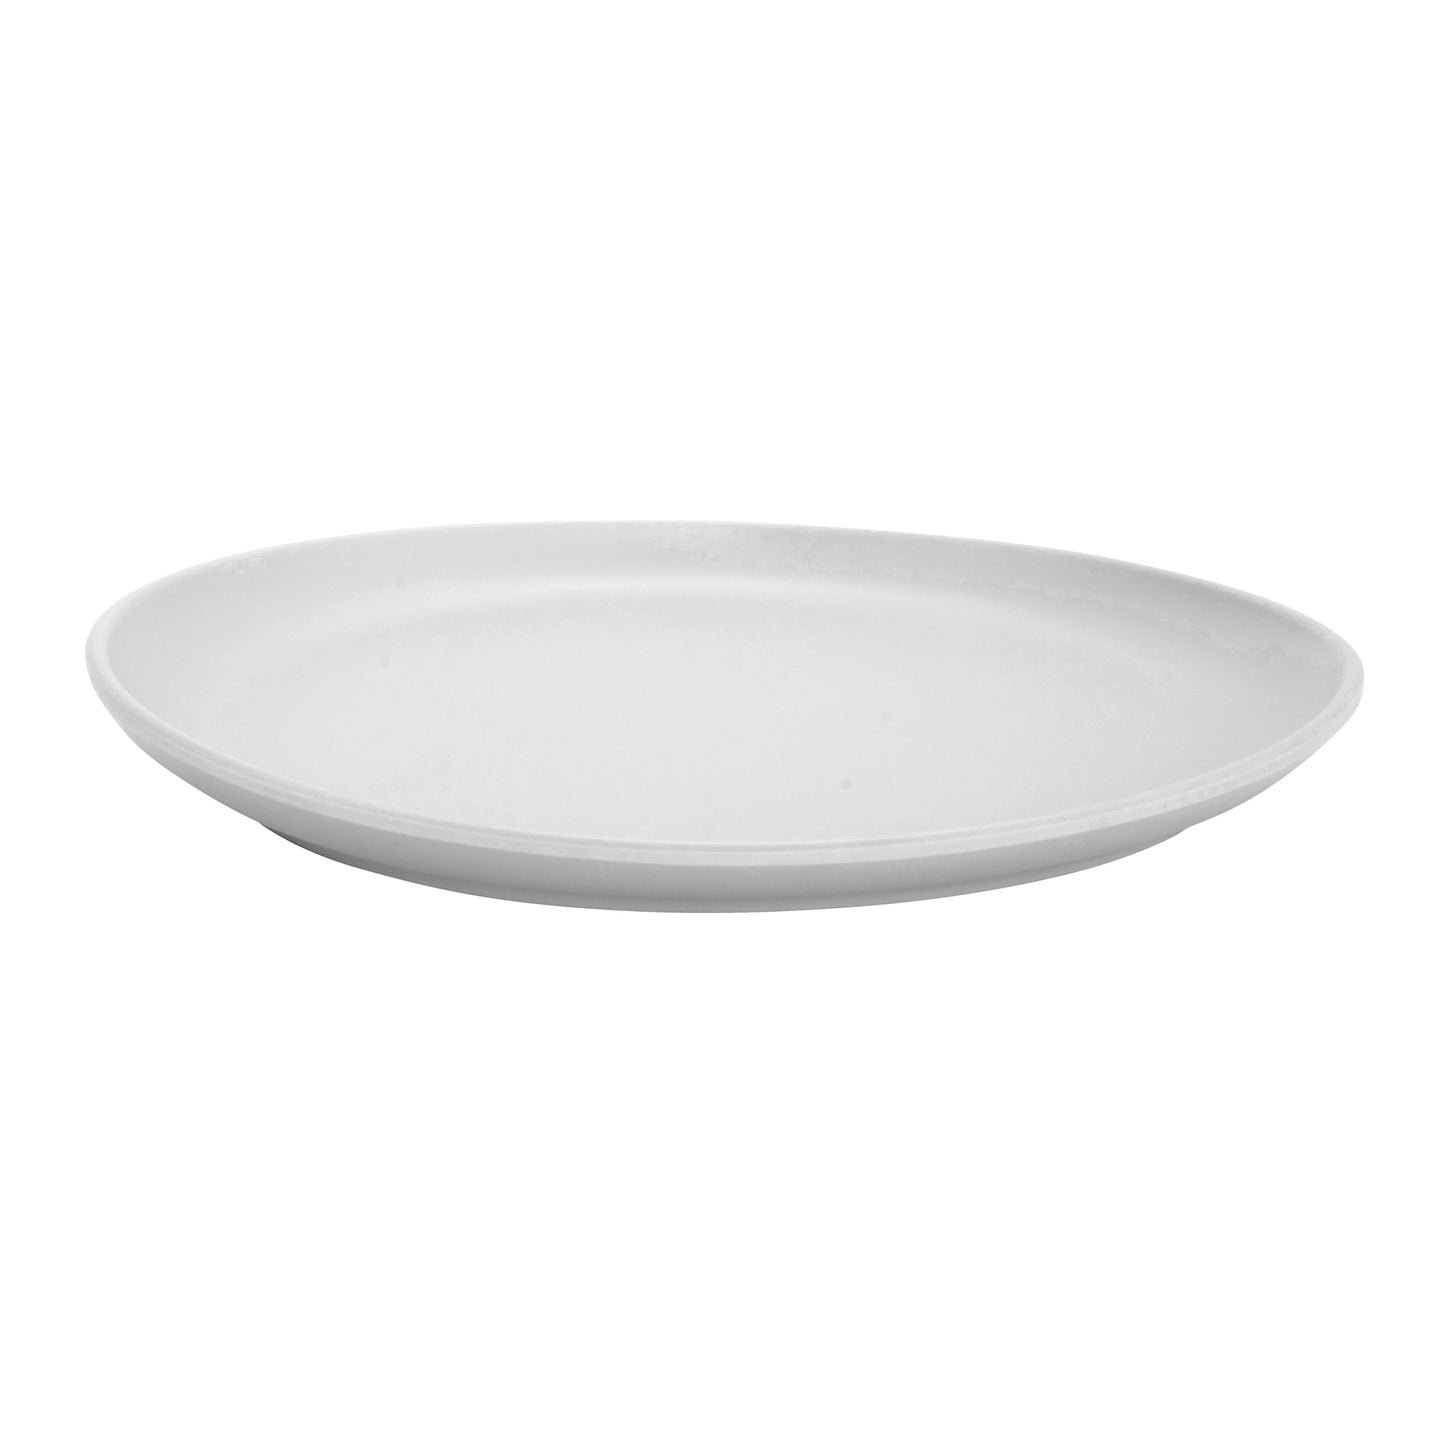 9.1" White, Melamine, Small Round Coupe  Dinner Plate, G.E.T. Riverstone (12 Pack)